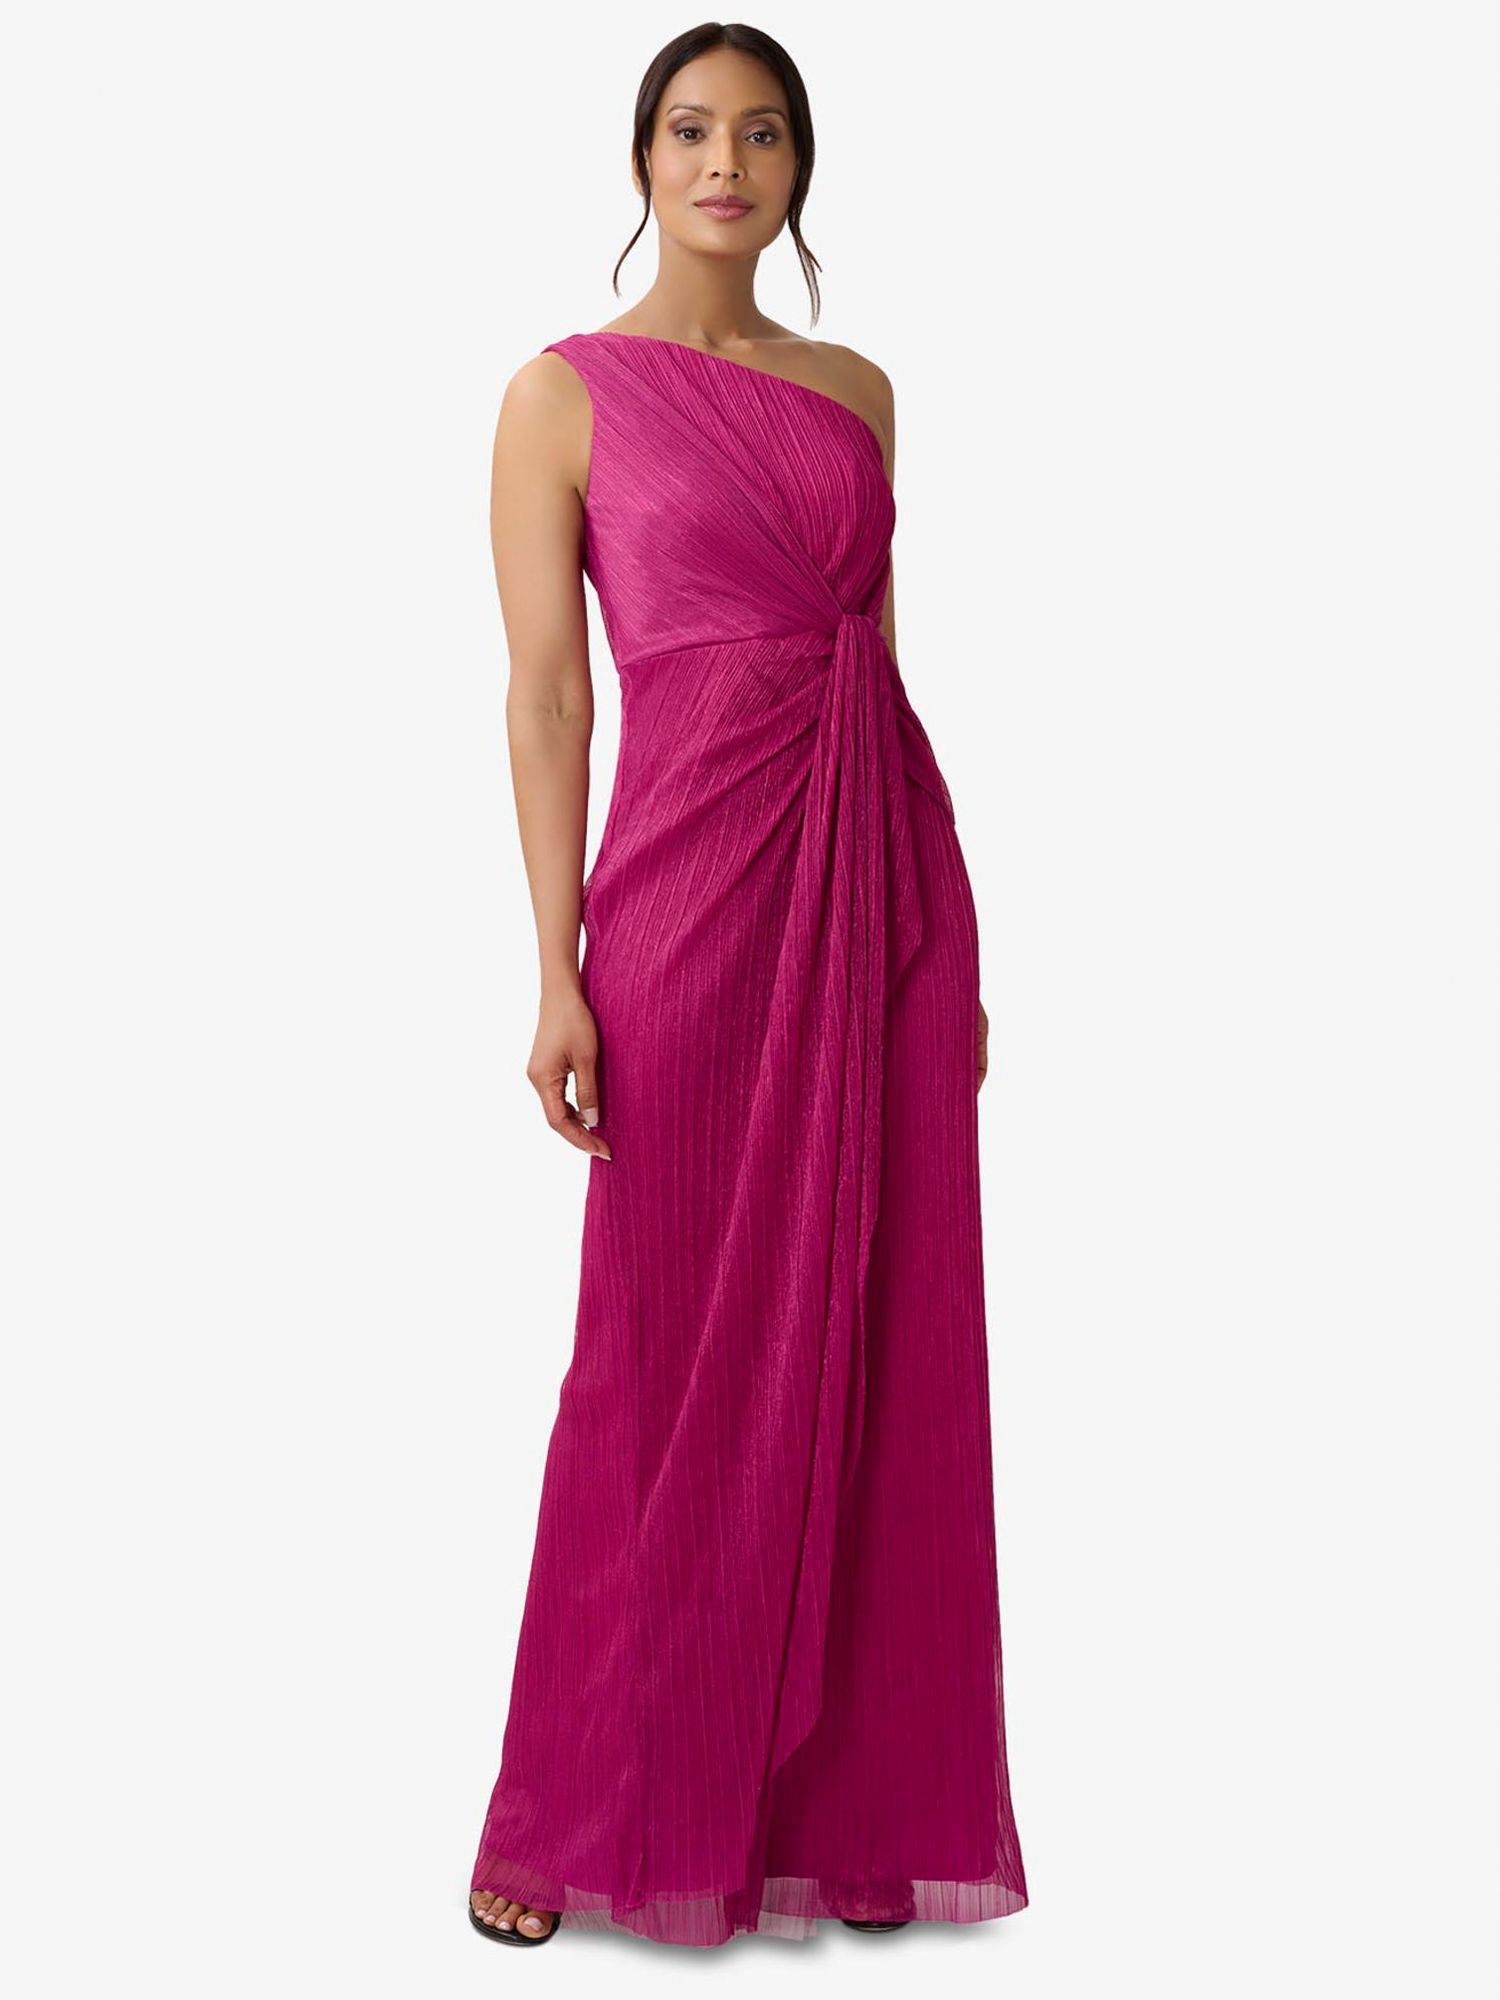 Buy Adrianna Papell Stardust One Shoulder Maxi Dress, Magenta Online at johnlewis.com